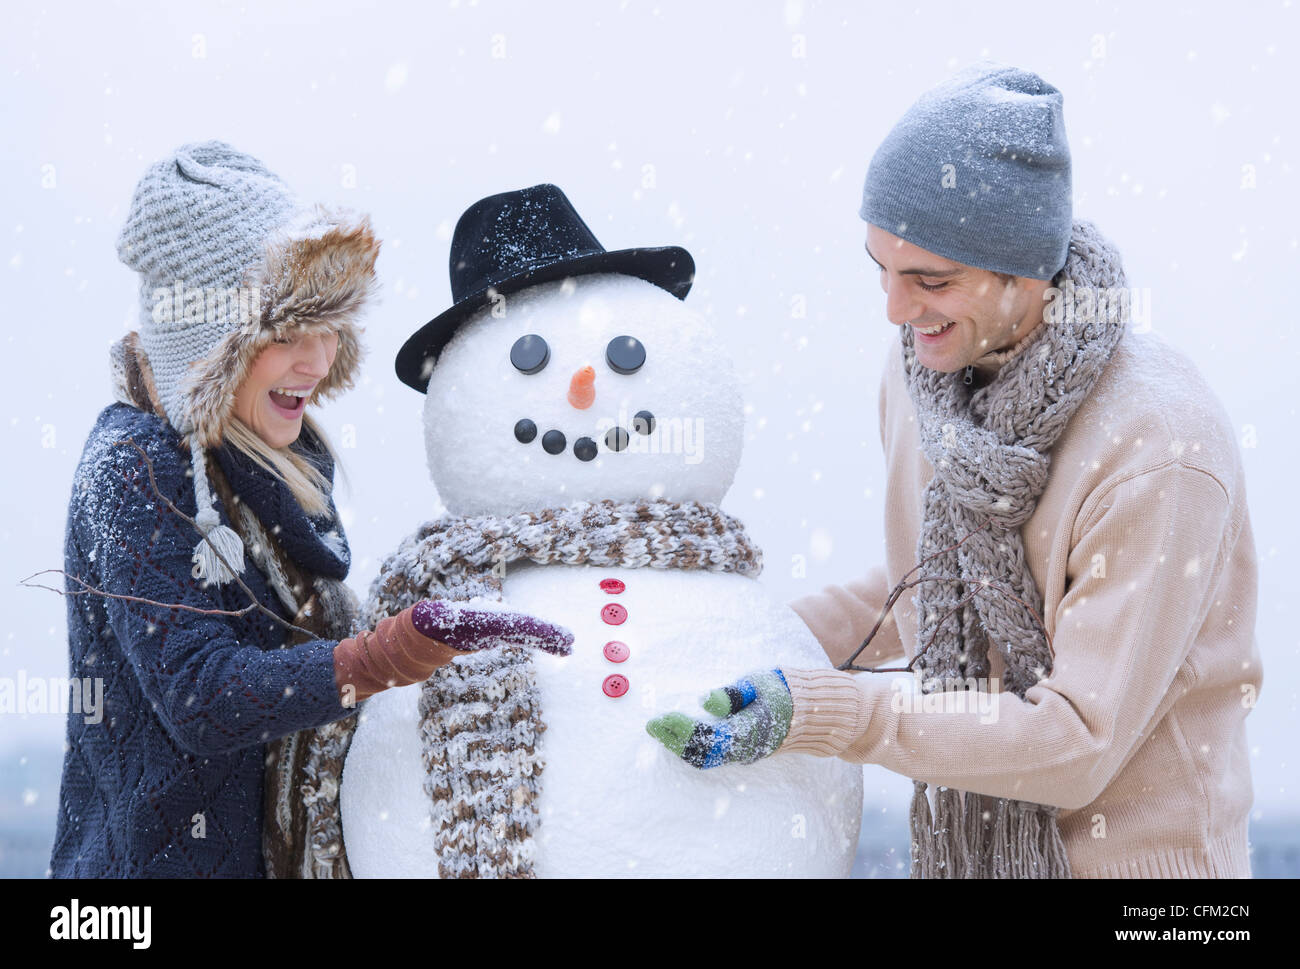 USA, New Jersey, Jersey City, Couple making snowman Banque D'Images